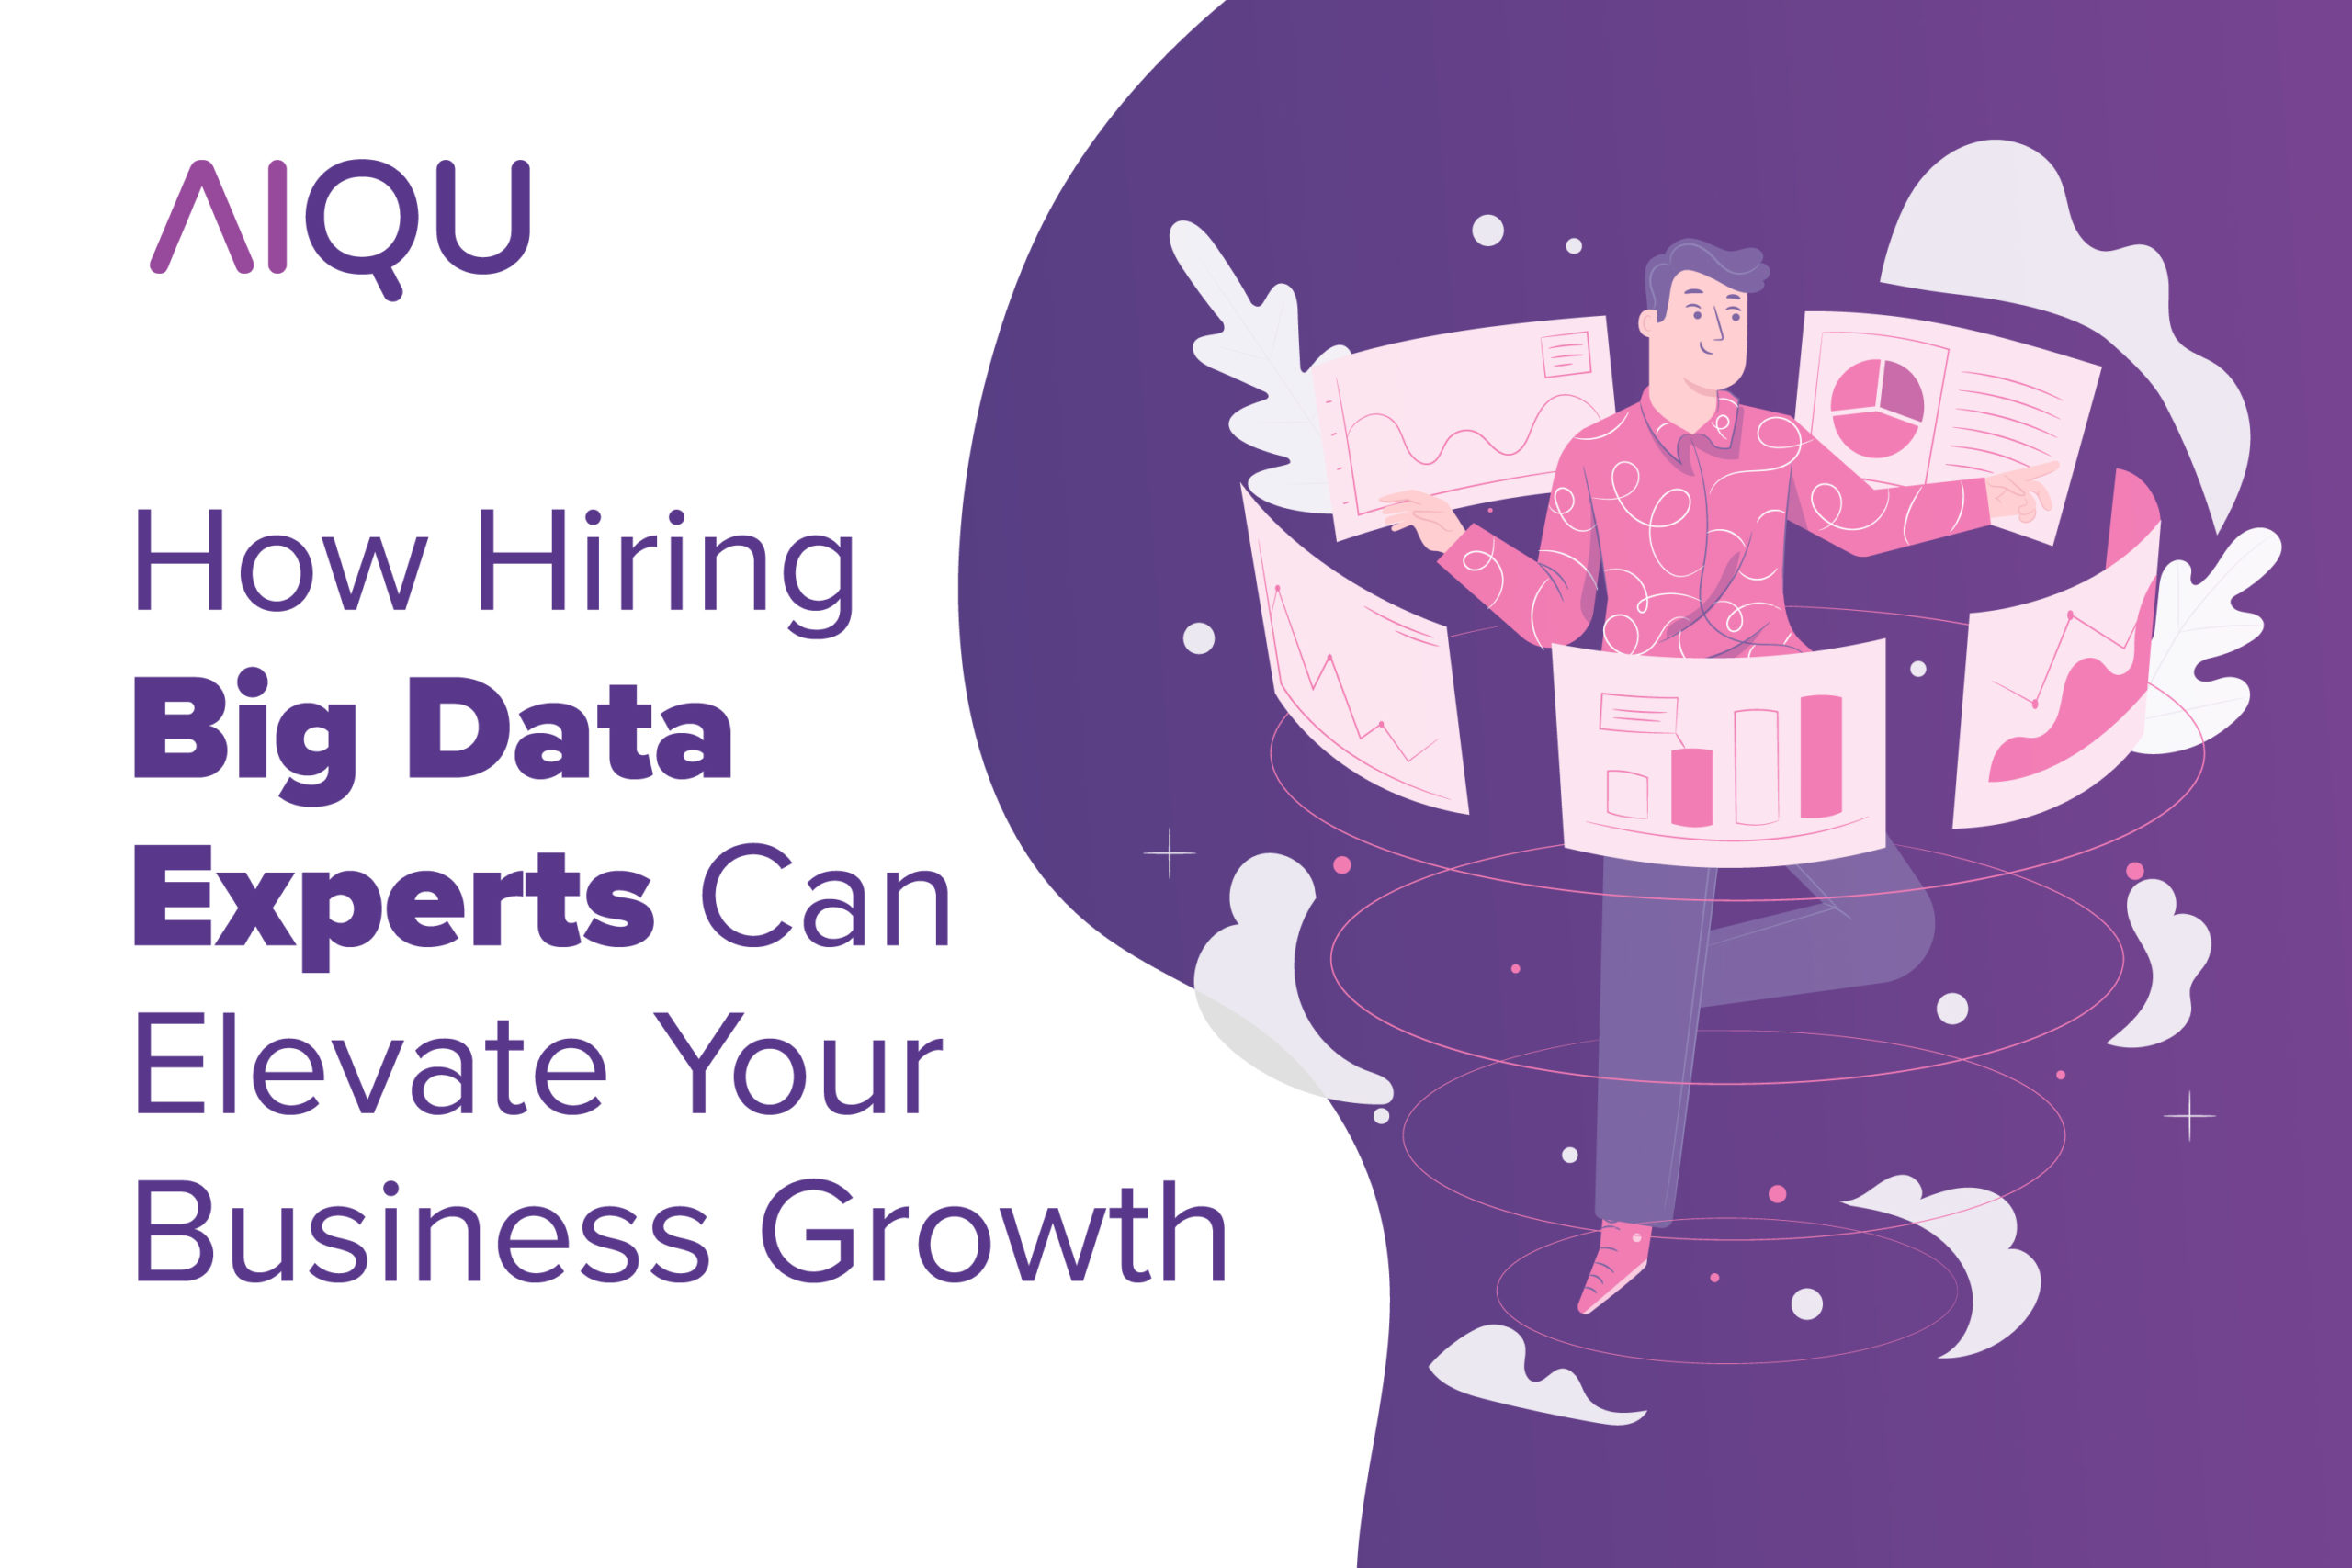 How Hiring Big Data Experts Can Elevate Your Business Growth